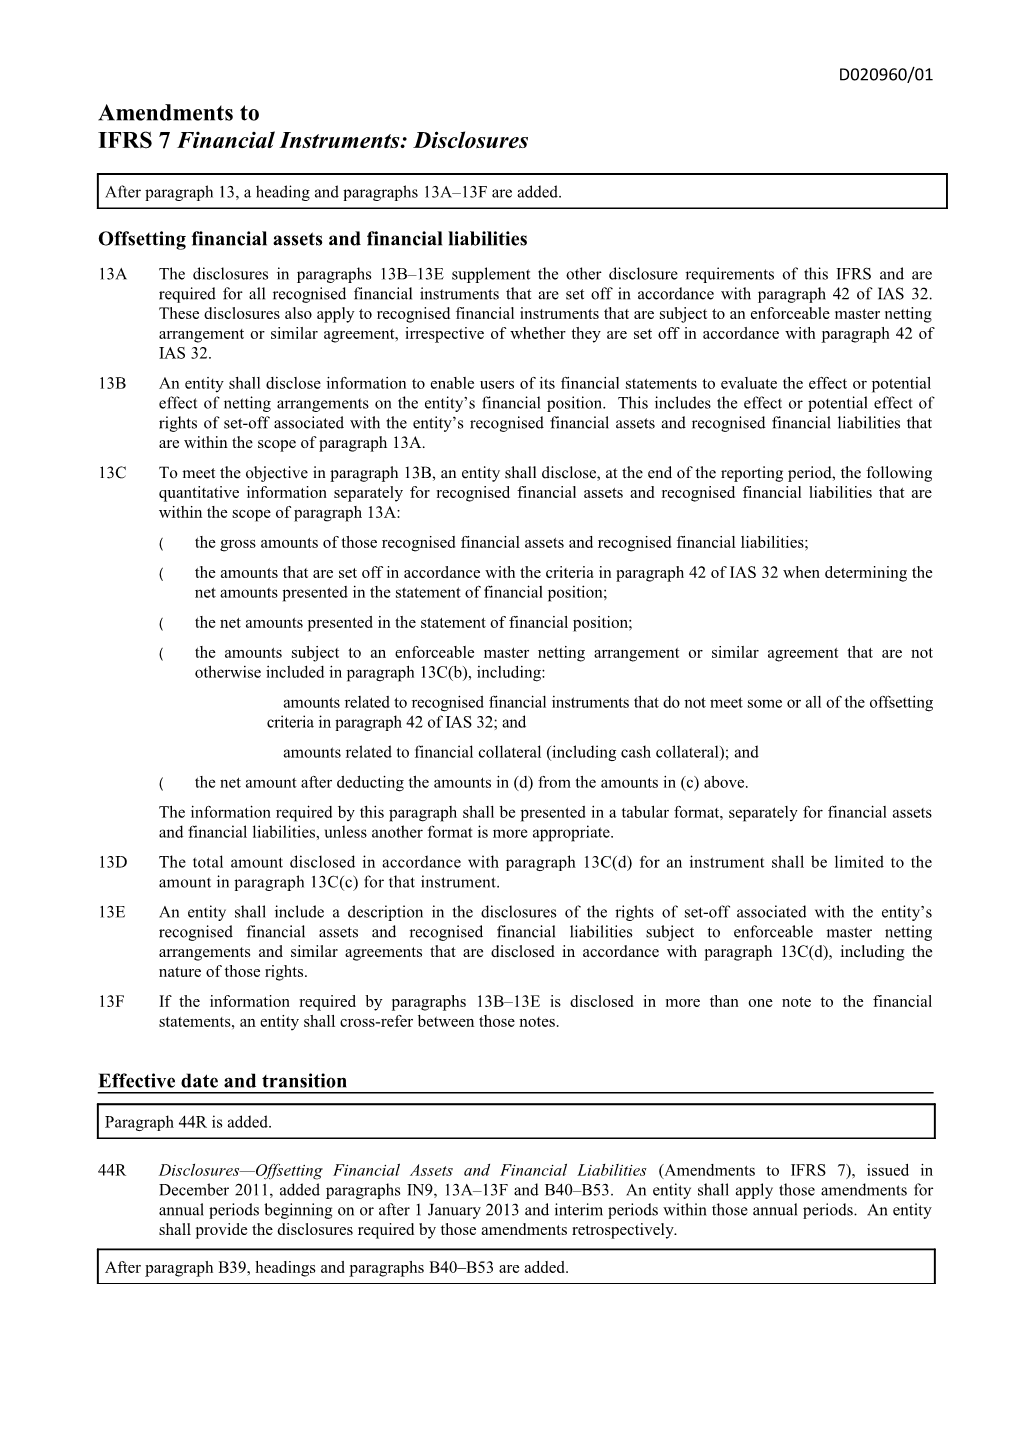 Disclosures Offsetting Financial Assets and Financial Liabilities